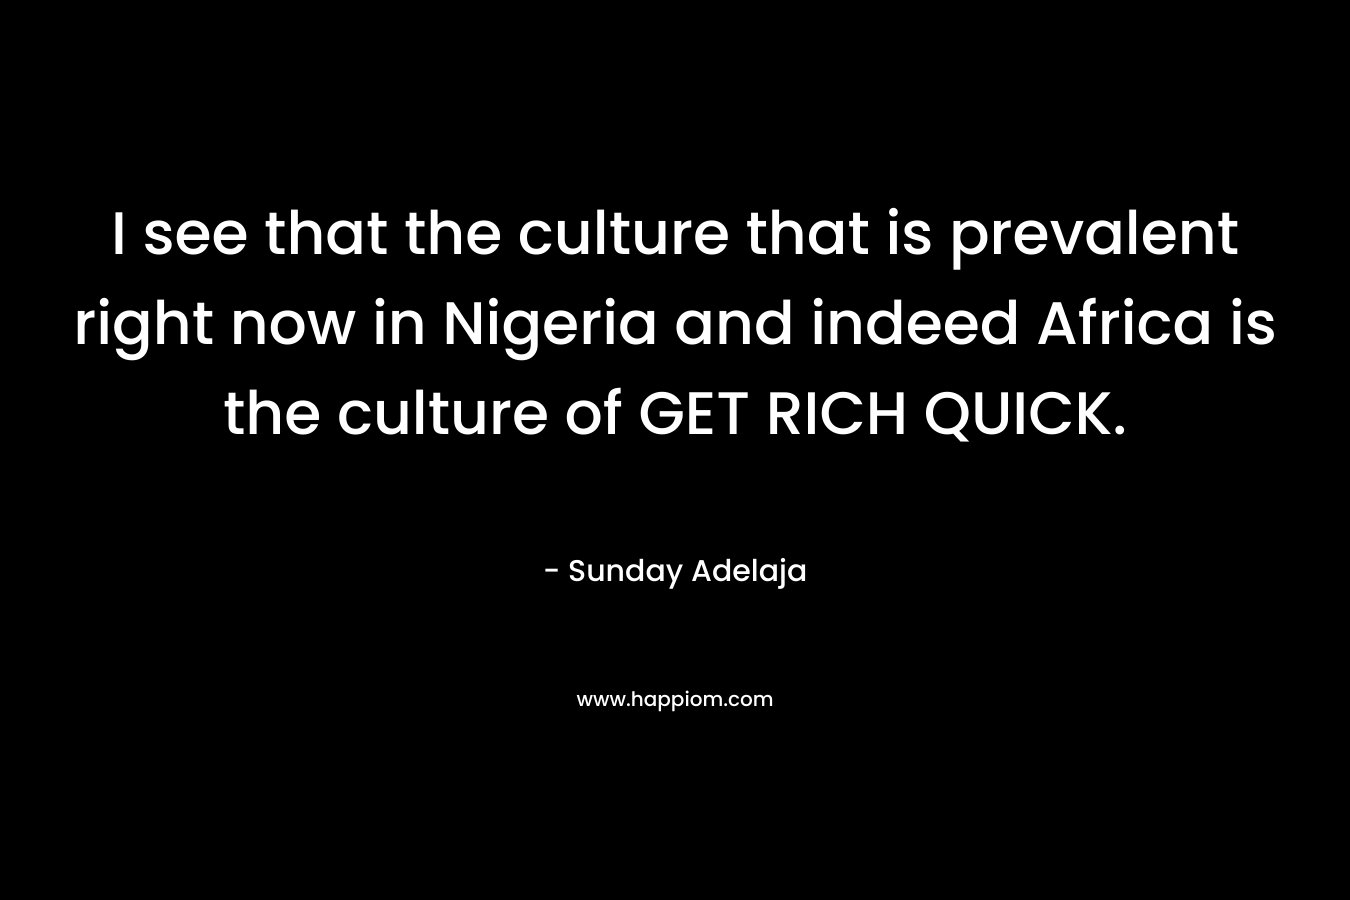 I see that the culture that is prevalent right now in Nigeria and indeed Africa is the culture of GET RICH QUICK. – Sunday Adelaja